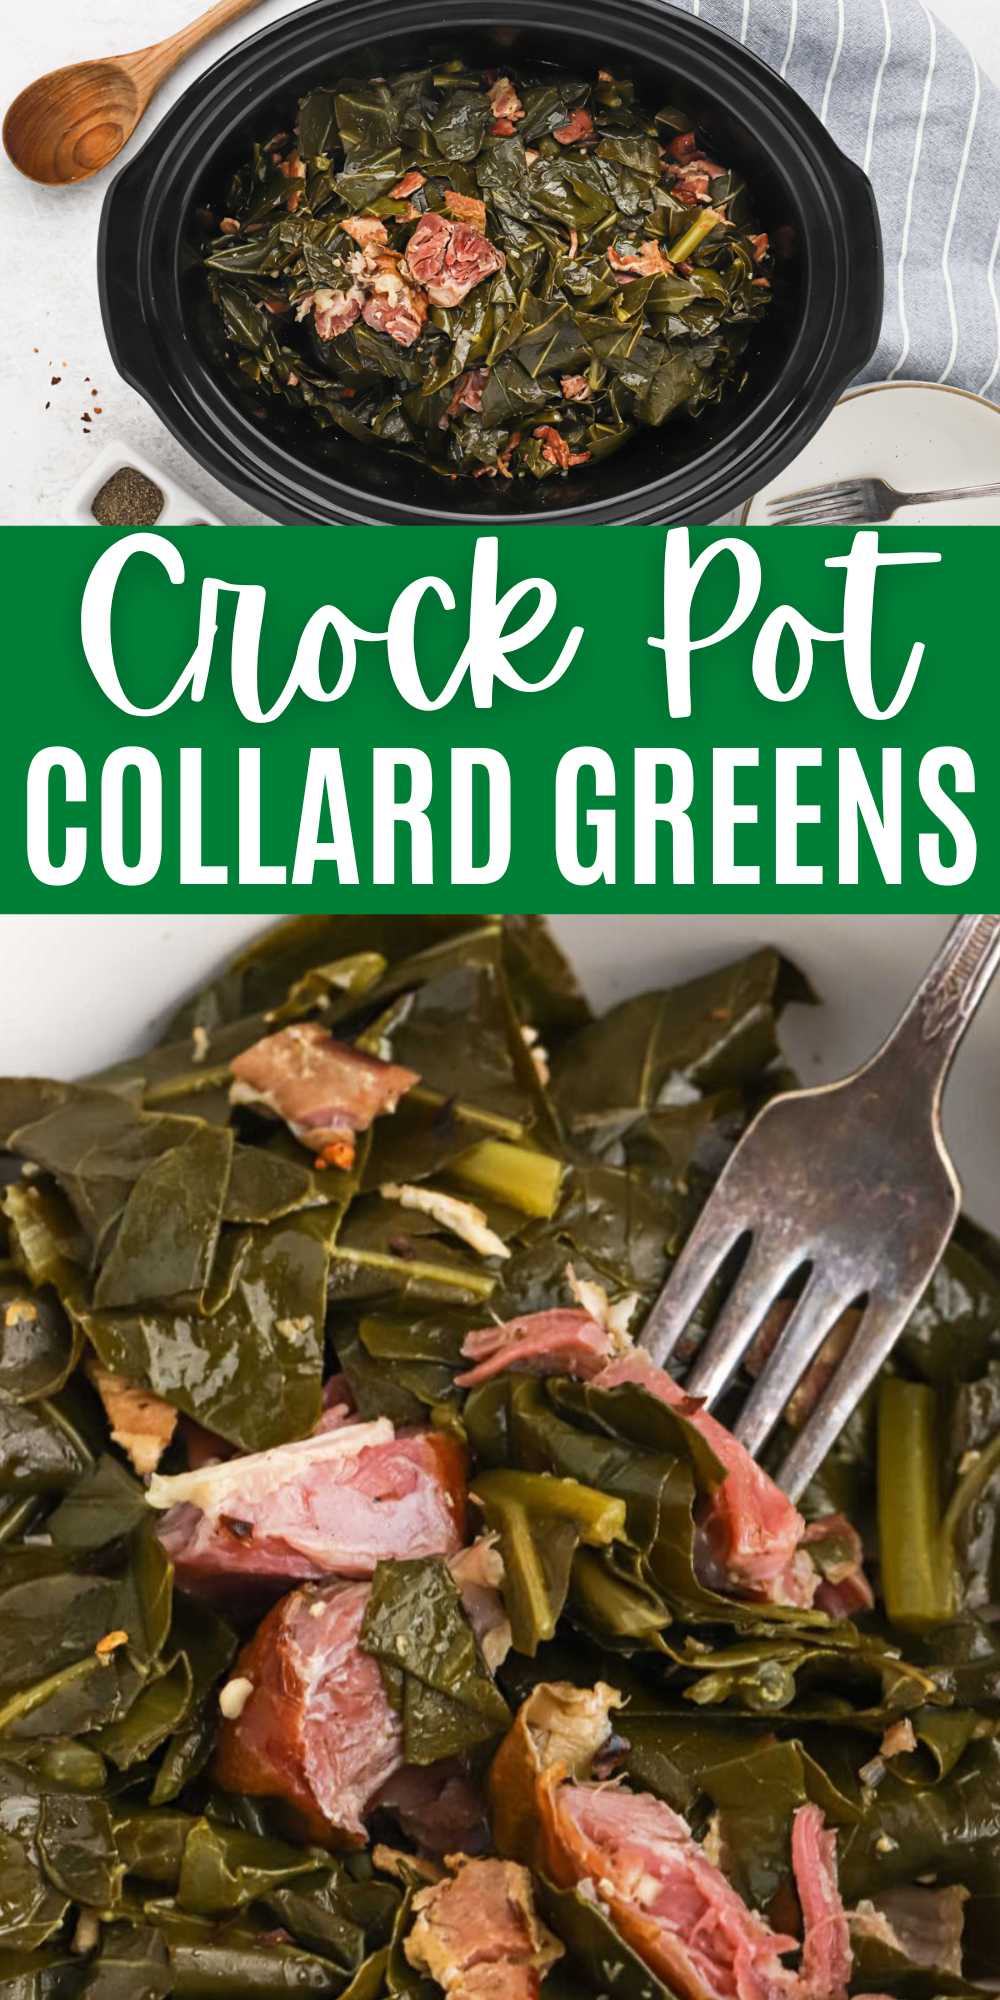 Crock Pot Collard Greens is a tasty side that is full of smokey flavor and a amazing broth. Serve this southern side dish for the holidays. Combining the collard greens with the ham hock, chopped bacon and simple seasoning makes this side dish so flavorful.  #eatingonadime #collardgreens #slowcookerrecipe #sidedish